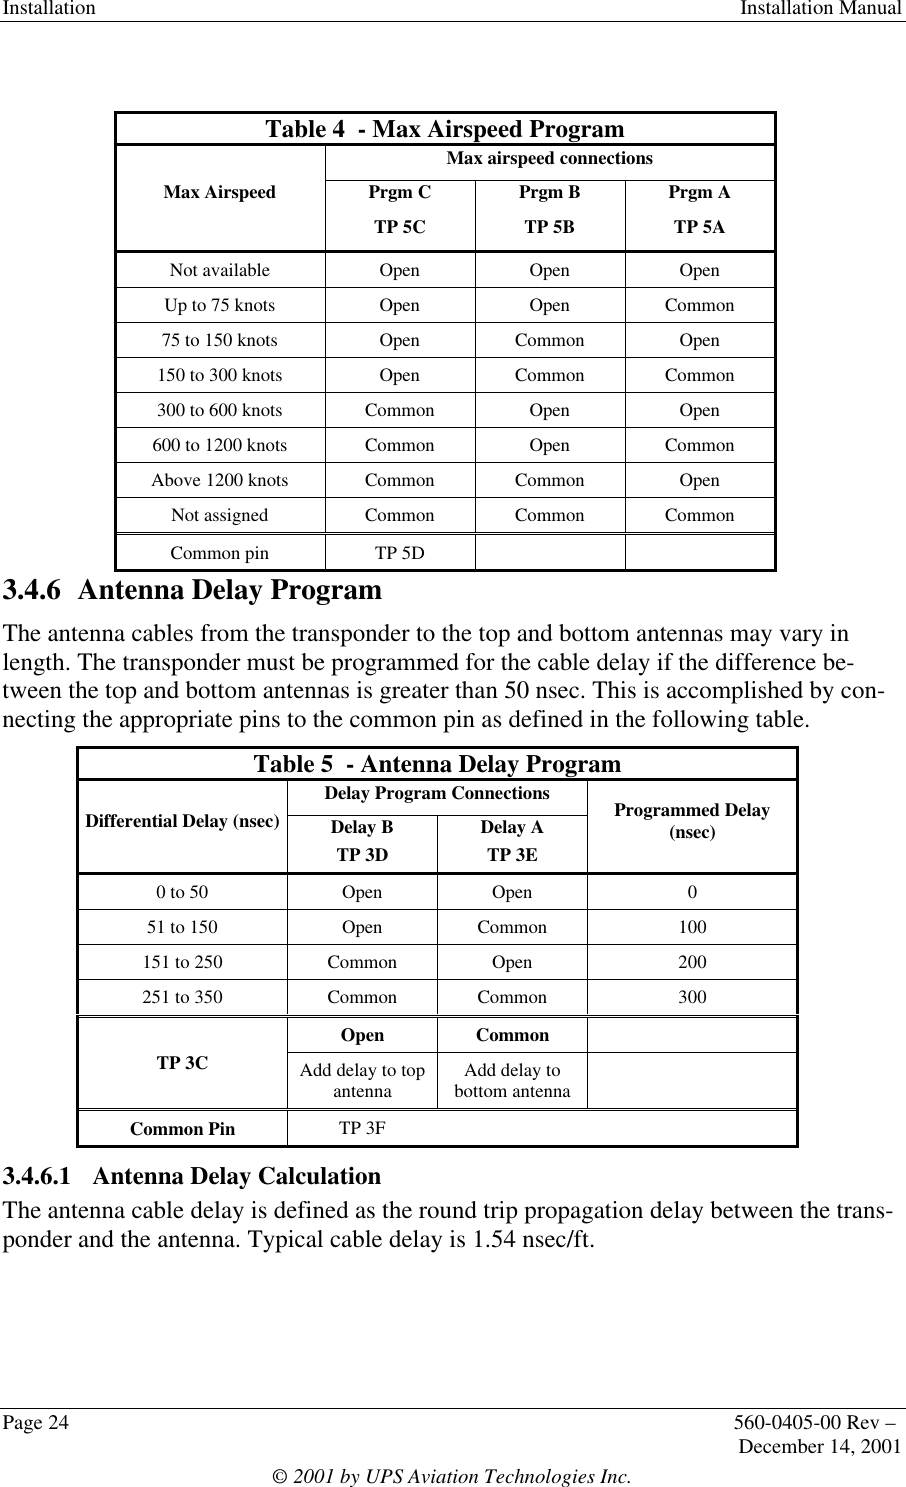 Installation  Installation ManualPage 24 560-0405-00 Rev –December 14, 2001© 2001 by UPS Aviation Technologies Inc.Table 4  - Max Airspeed ProgramMax airspeed connectionsMax Airspeed Prgm CTP 5CPrgm BTP 5BPrgm ATP 5ANot available Open Open OpenUp to 75 knots Open Open Common75 to 150 knots Open Common Open150 to 300 knots Open Common Common300 to 600 knots Common Open Open600 to 1200 knots Common Open CommonAbove 1200 knots Common Common OpenNot assigned Common Common CommonCommon pin TP 5D3.4.6 Antenna Delay ProgramThe antenna cables from the transponder to the top and bottom antennas may vary inlength. The transponder must be programmed for the cable delay if the difference be-tween the top and bottom antennas is greater than 50 nsec. This is accomplished by con-necting the appropriate pins to the common pin as defined in the following table.Table 5  - Antenna Delay ProgramDelay Program ConnectionsDifferential Delay (nsec) Delay BTP 3DDelay ATP 3EProgrammed Delay(nsec)0 to 50 Open Open 051 to 150 Open Common 100151 to 250 Common Open 200251 to 350 Common Common 300Open CommonTP 3C Add delay to topantenna Add delay tobottom antennaCommon Pin TP 3F3.4.6.1 Antenna Delay CalculationThe antenna cable delay is defined as the round trip propagation delay between the trans-ponder and the antenna. Typical cable delay is 1.54 nsec/ft.